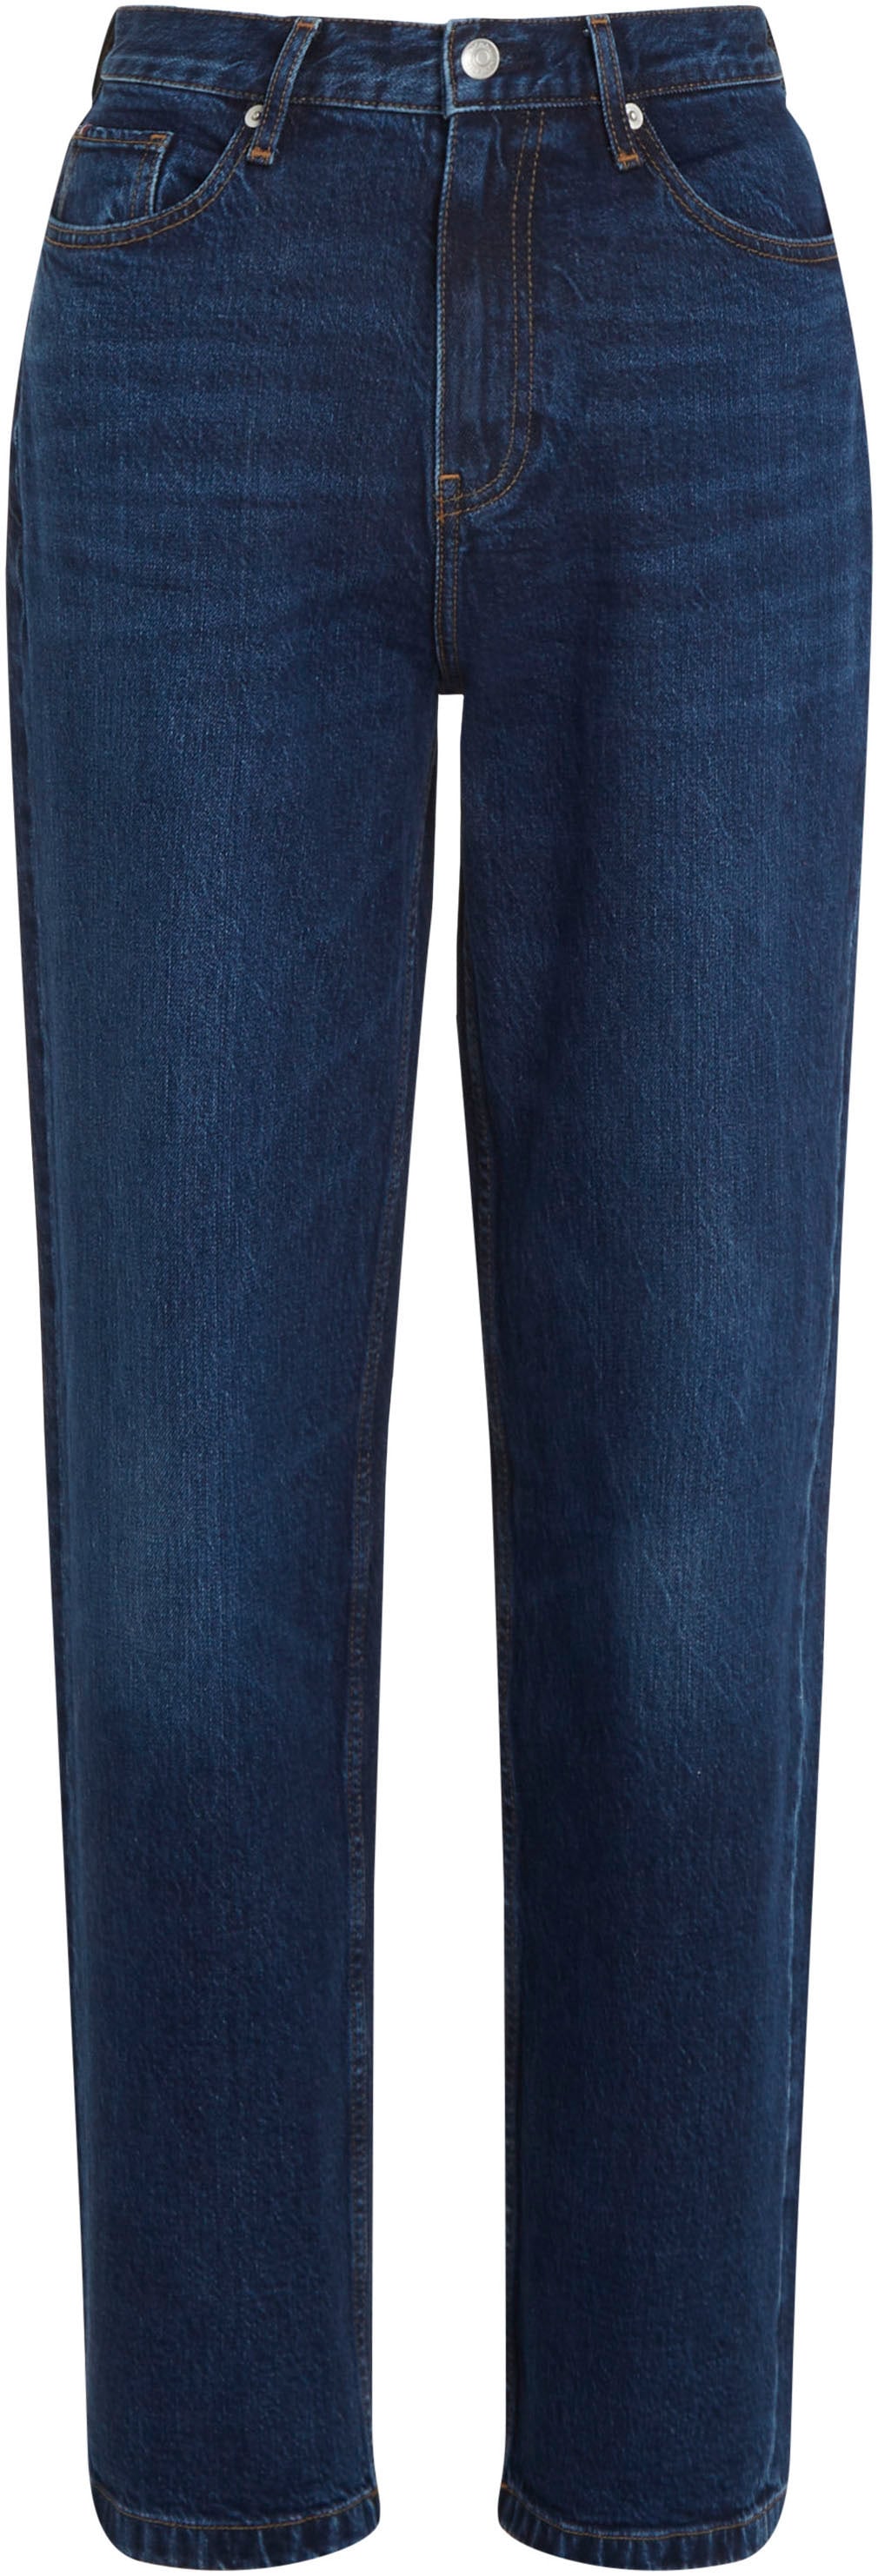 in Relax-fit-Jeans weißer kaufen online »RELAXED STRAIGHT Waschung HW Hilfiger PAM«, Tommy